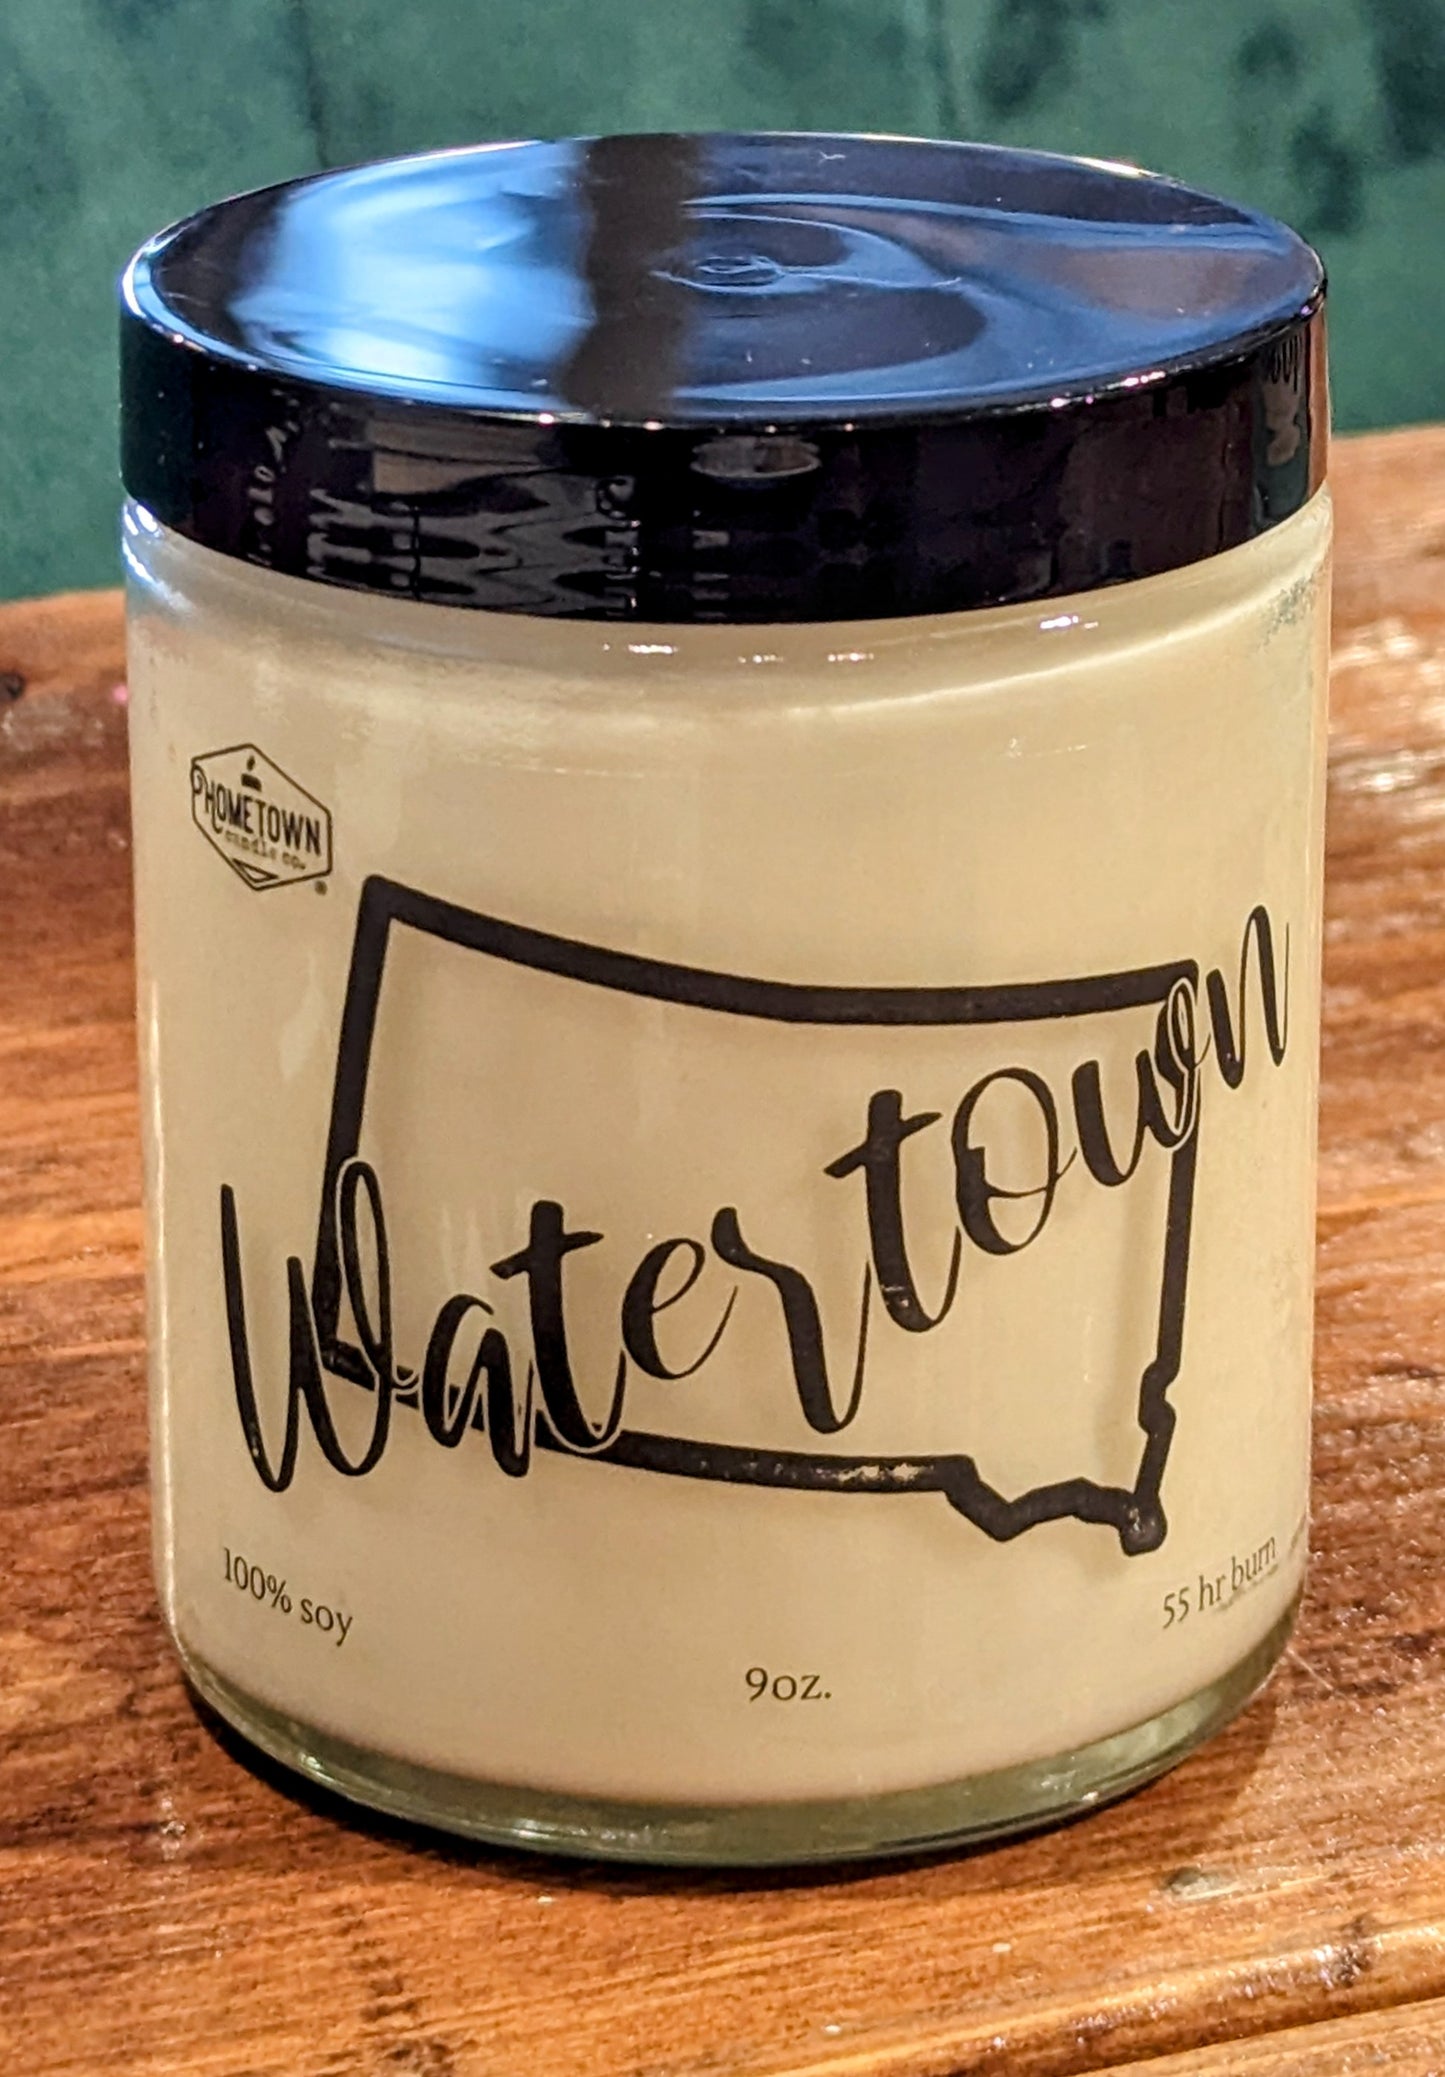 Hometown Watertown Candle